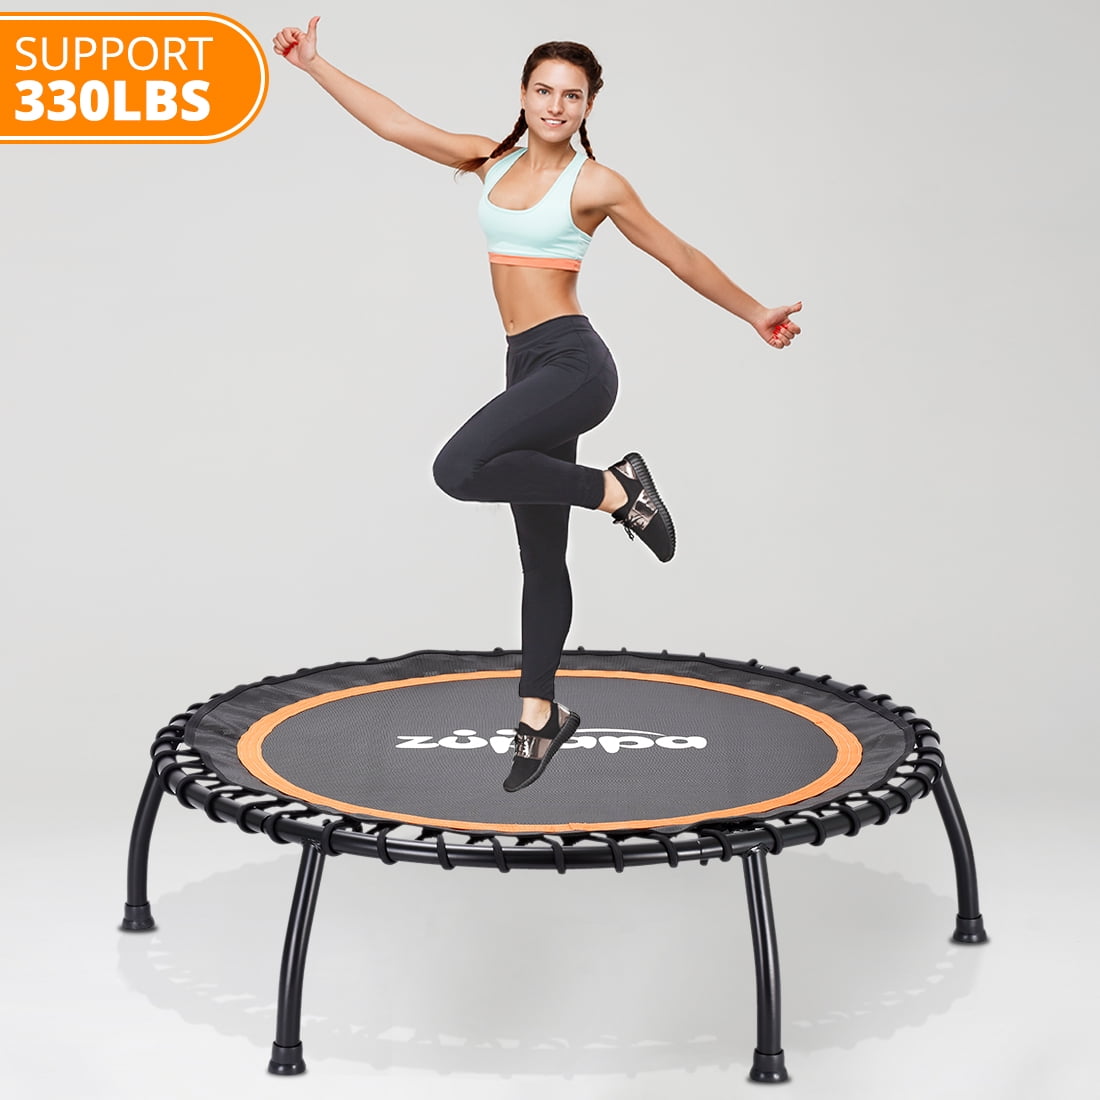 Mini Foldable Trampoline Rebounder Bouncing Fitness Exercise Gym Jump Trainer